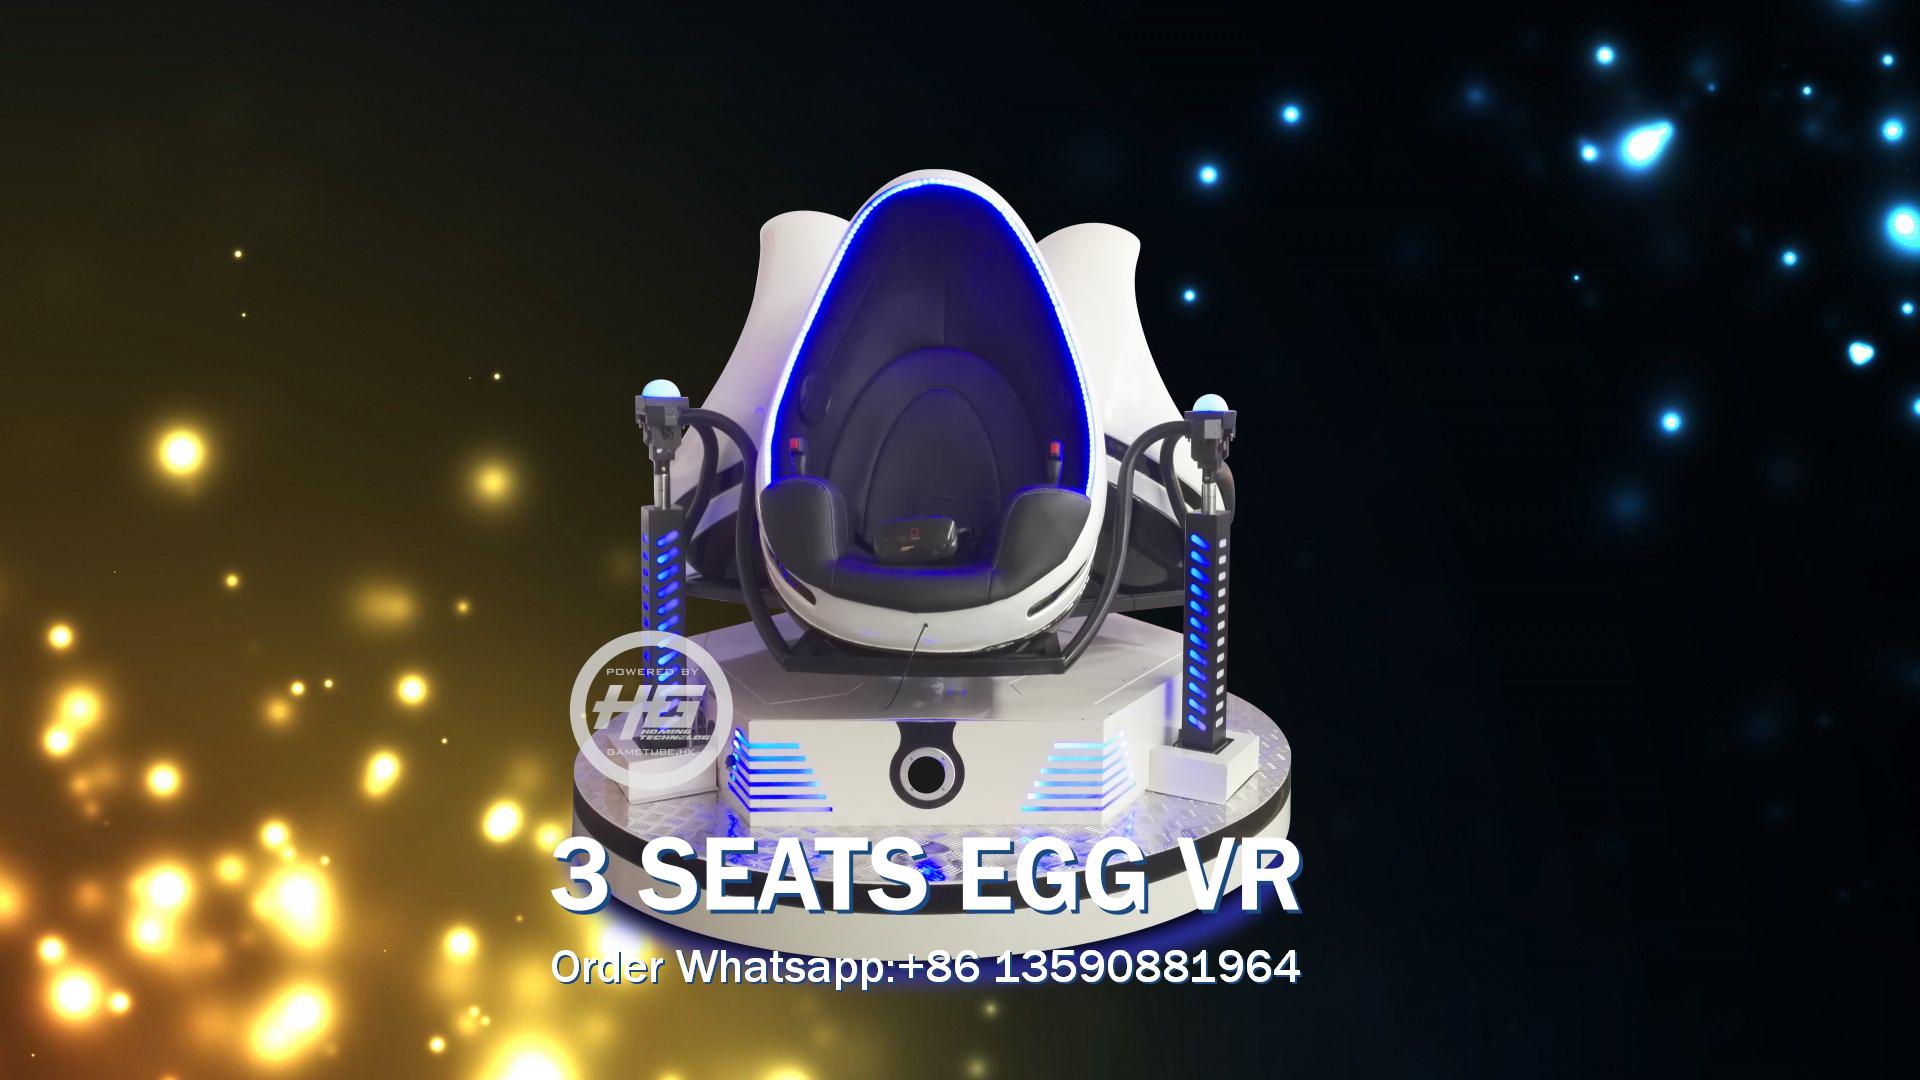 Newest 9D VR Simulator Games - 9D VR 3 Seats Eggs Game